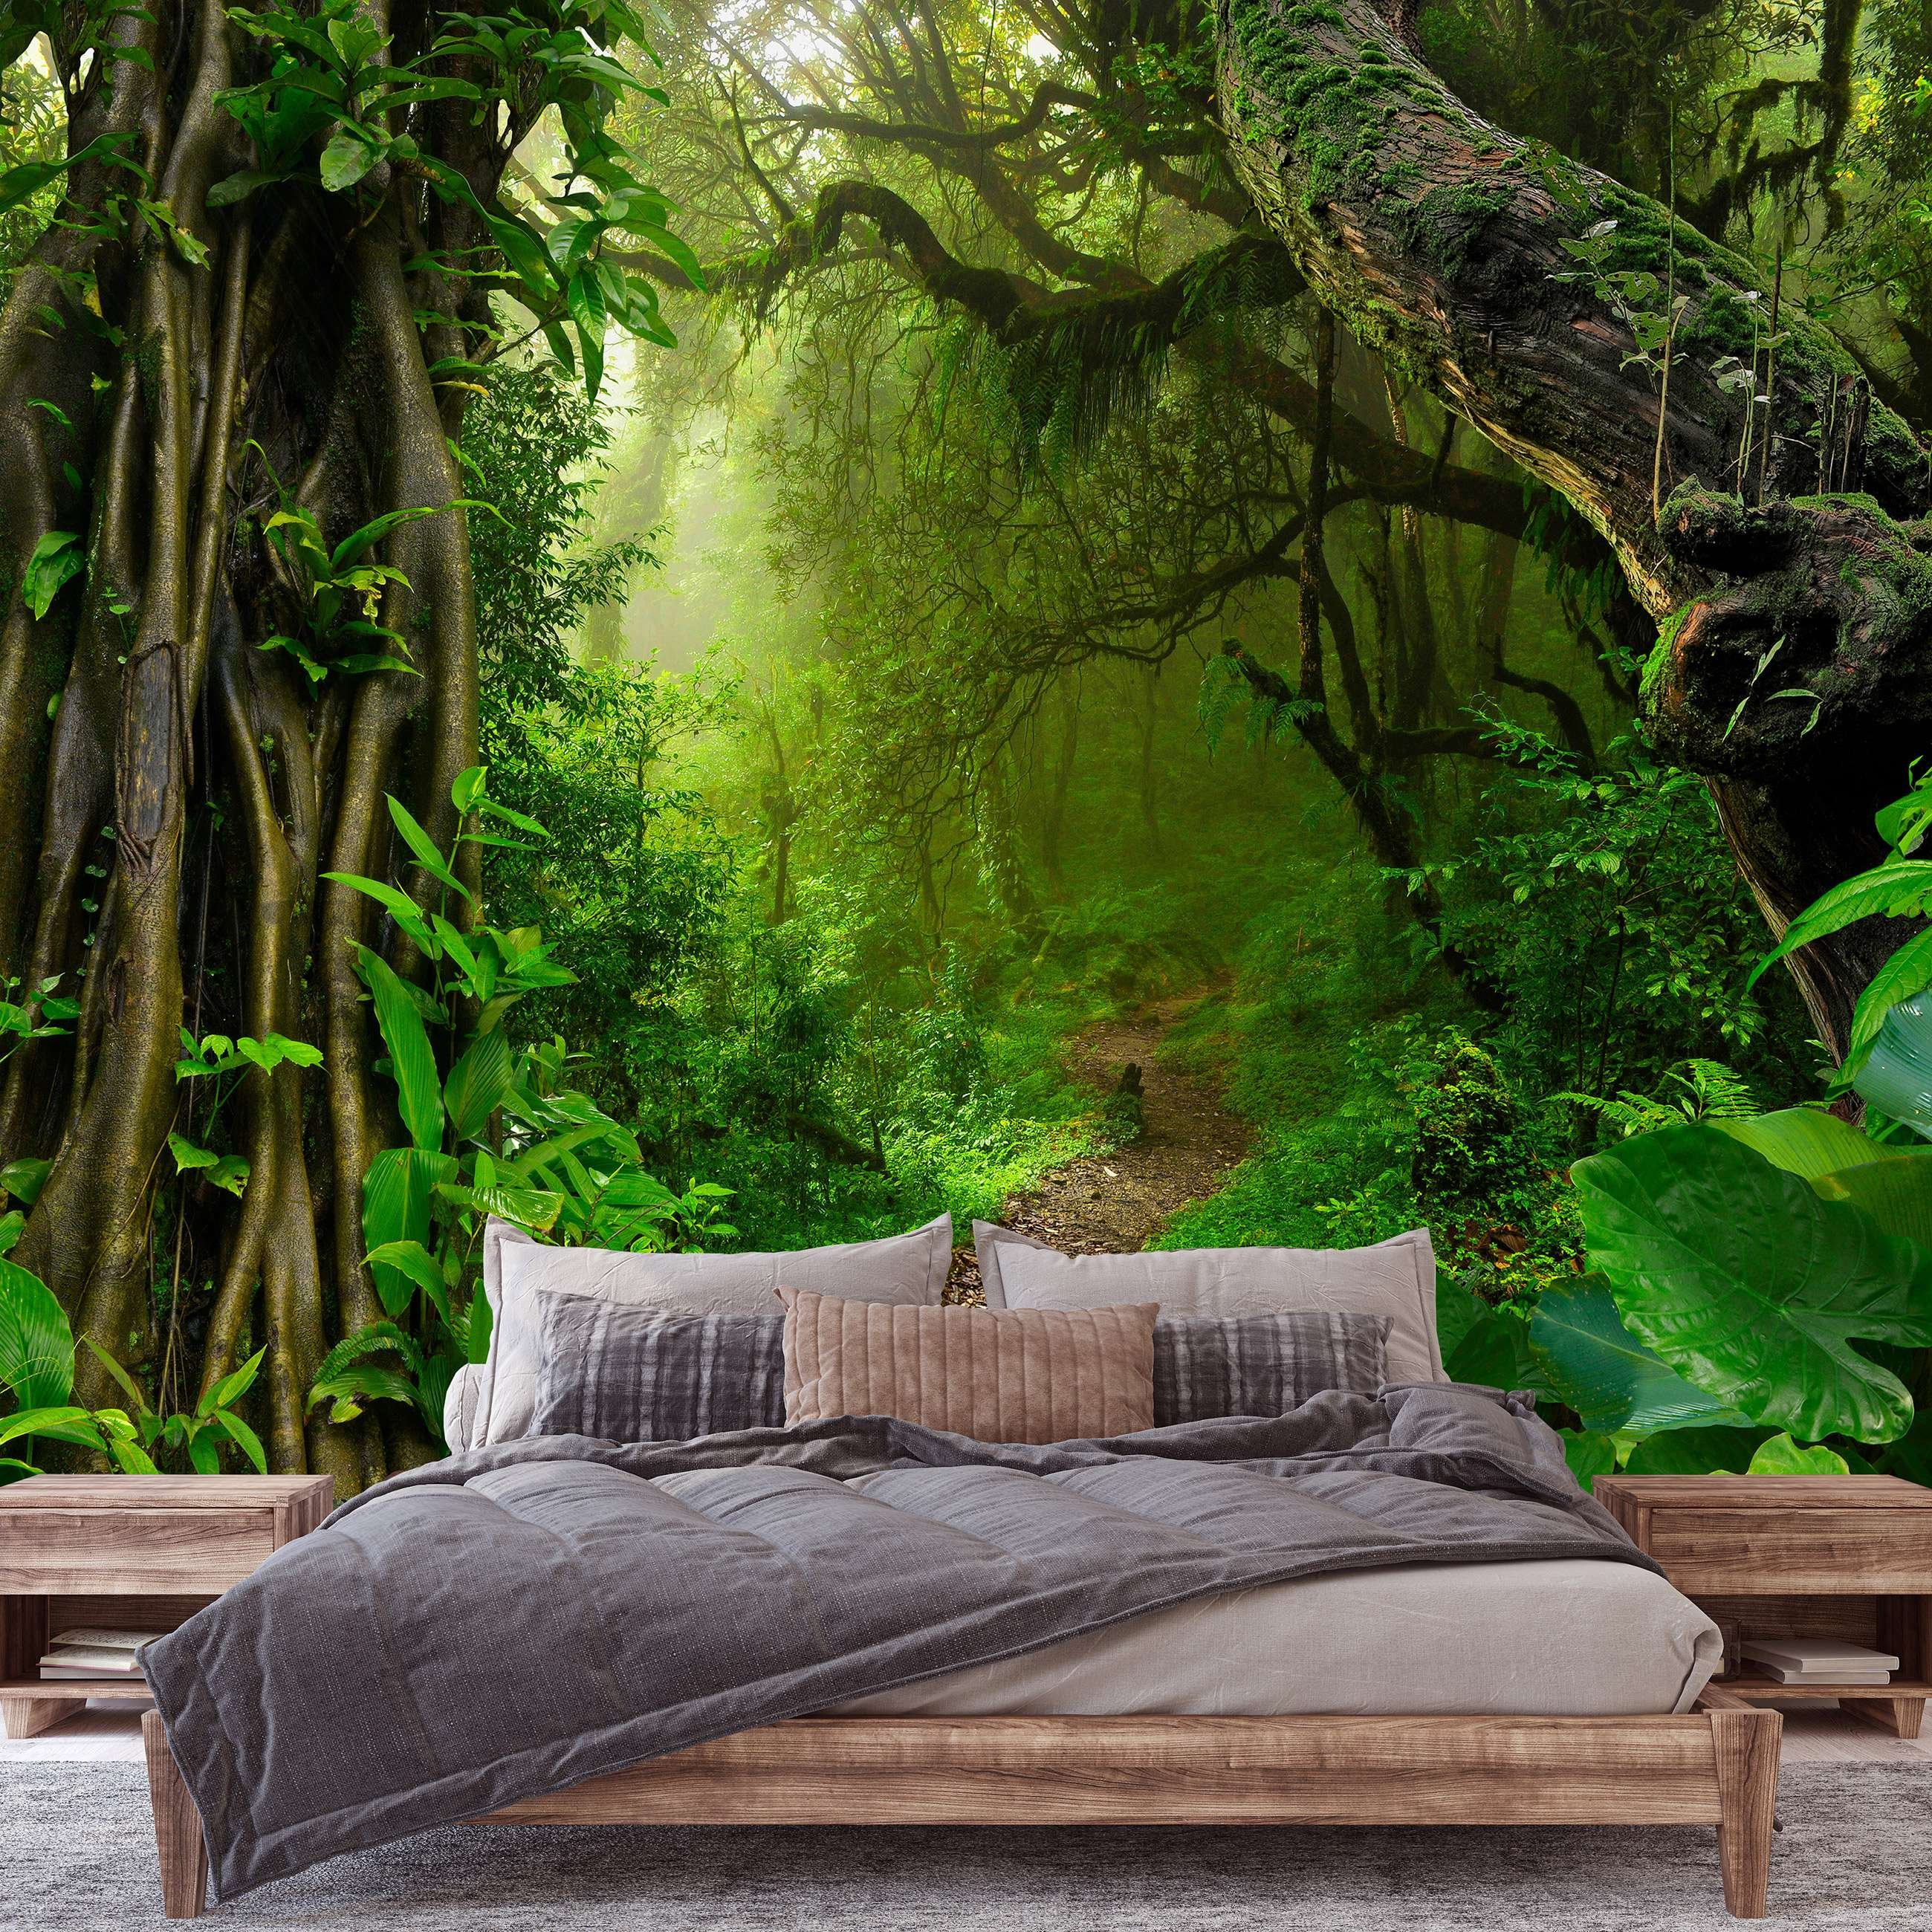 Wall mural vlies: Path in the forest - 254x184 cm